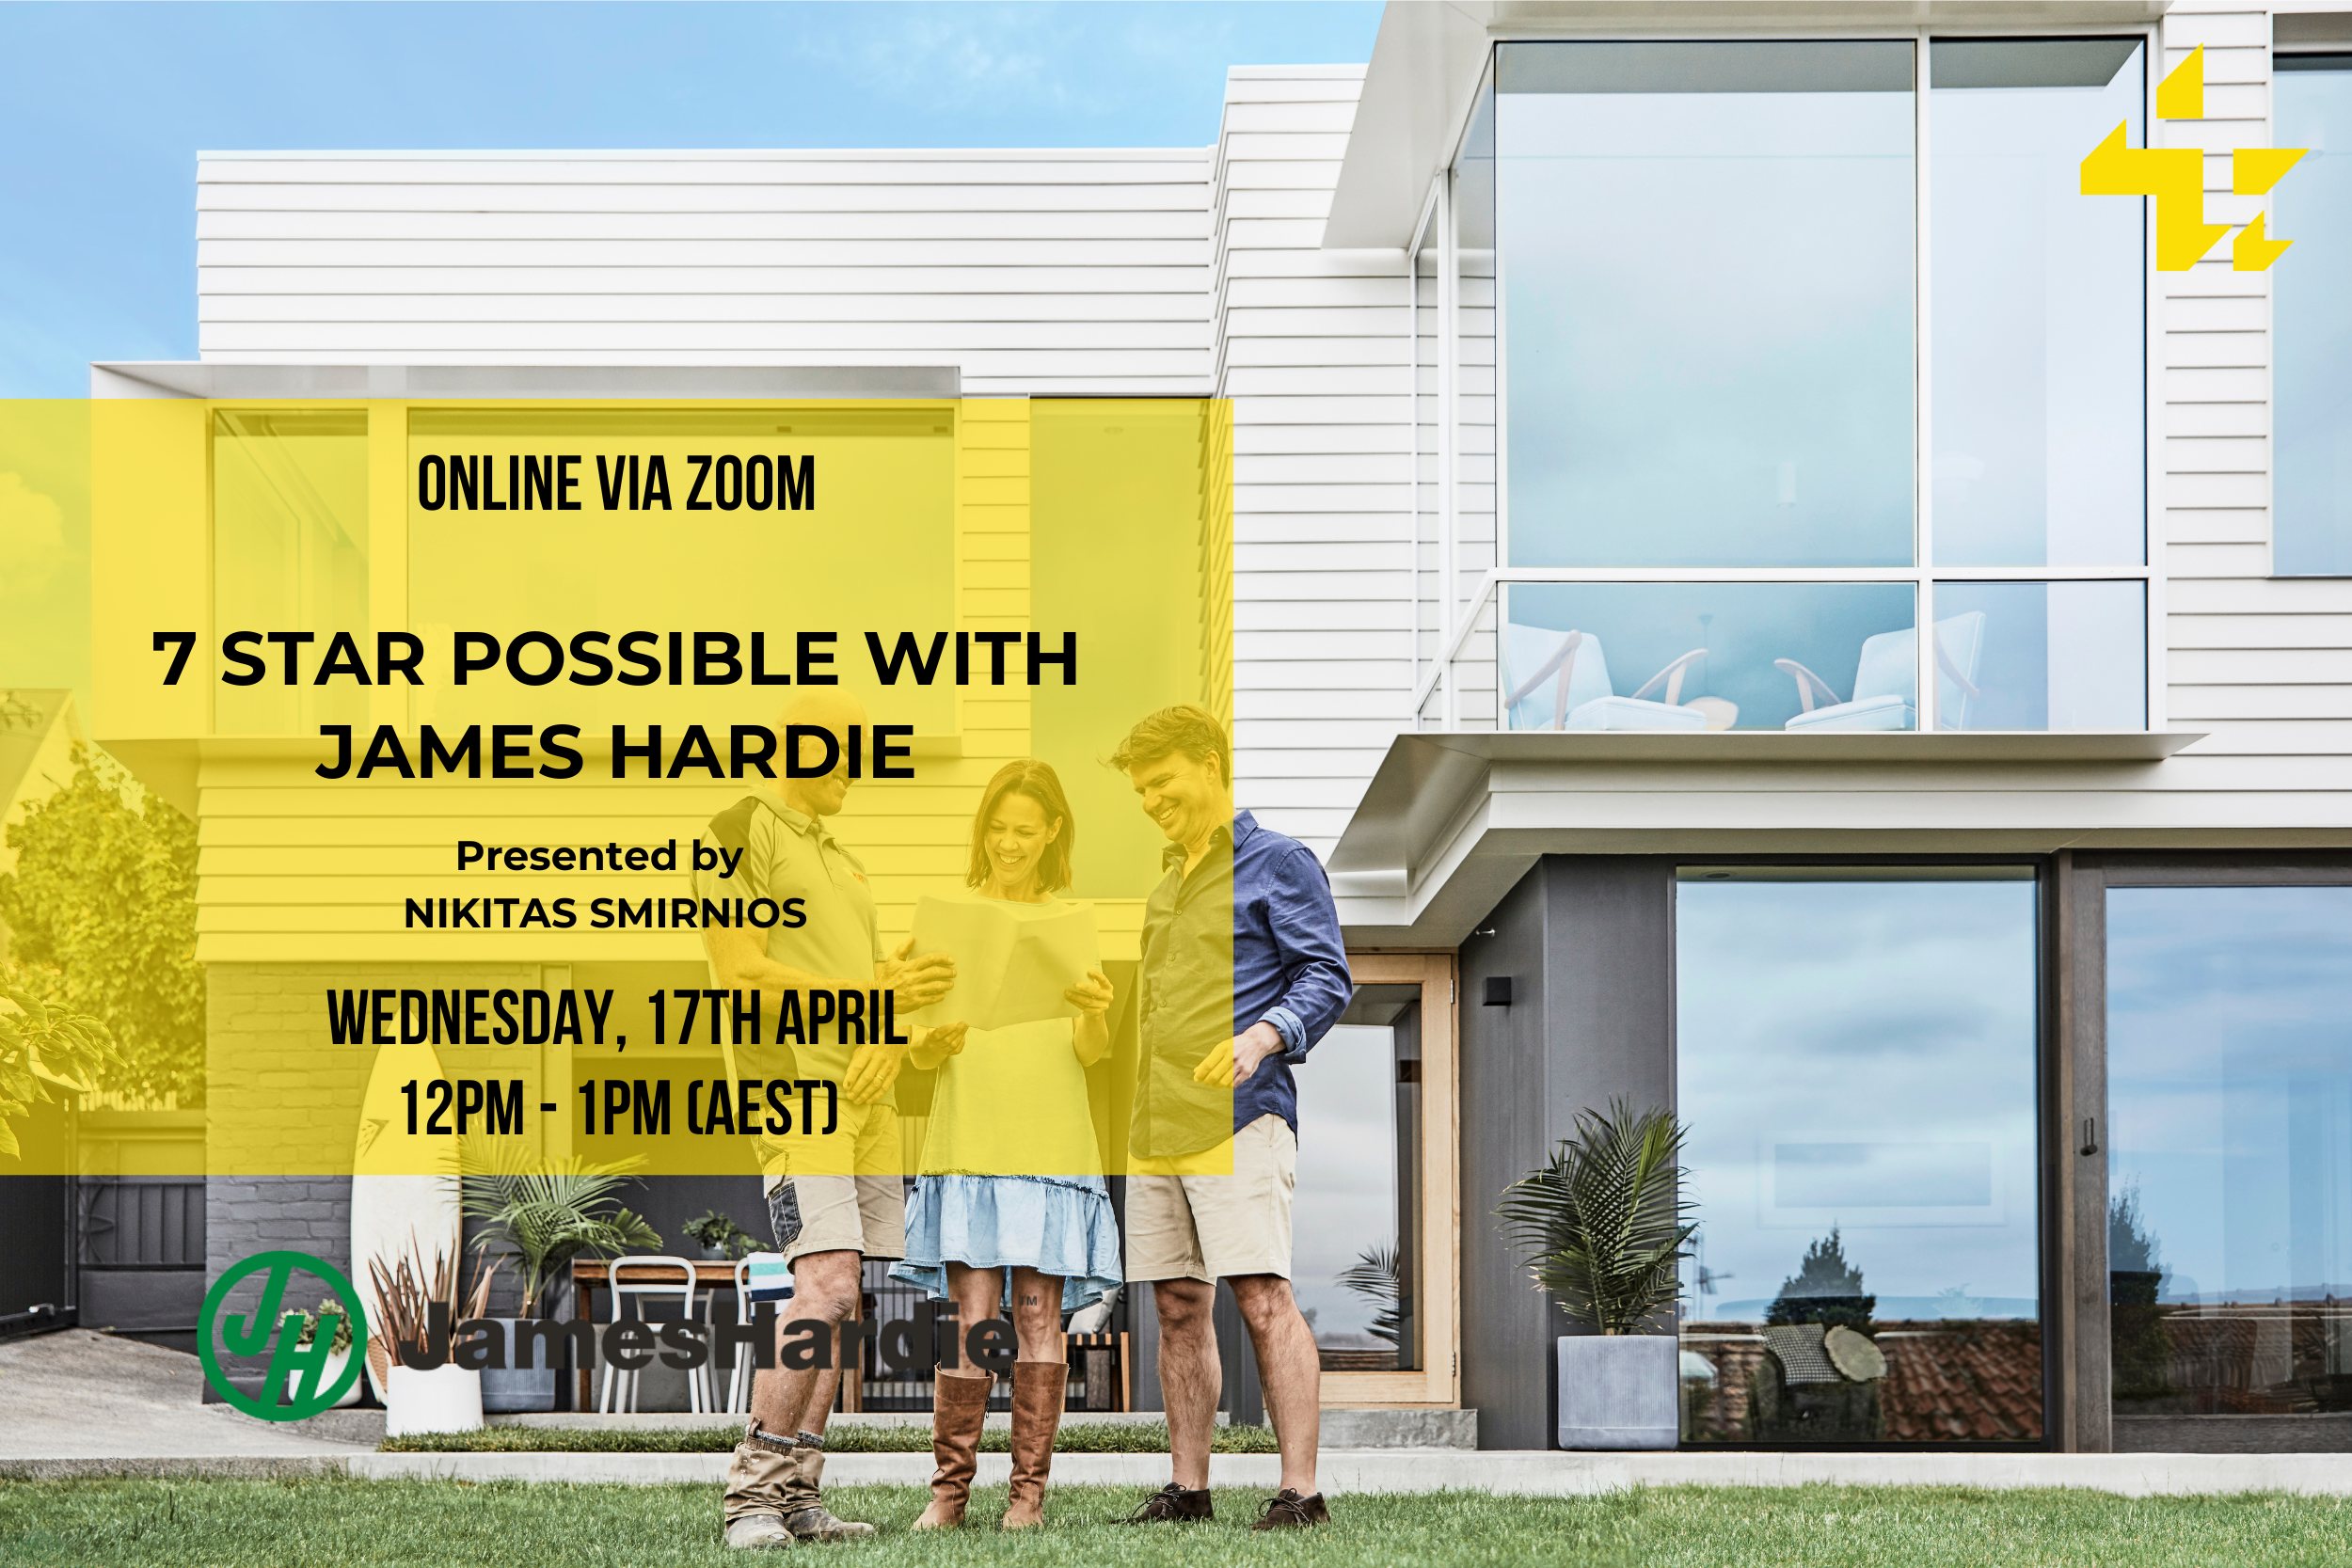 Making 7-star possible with James Hardie